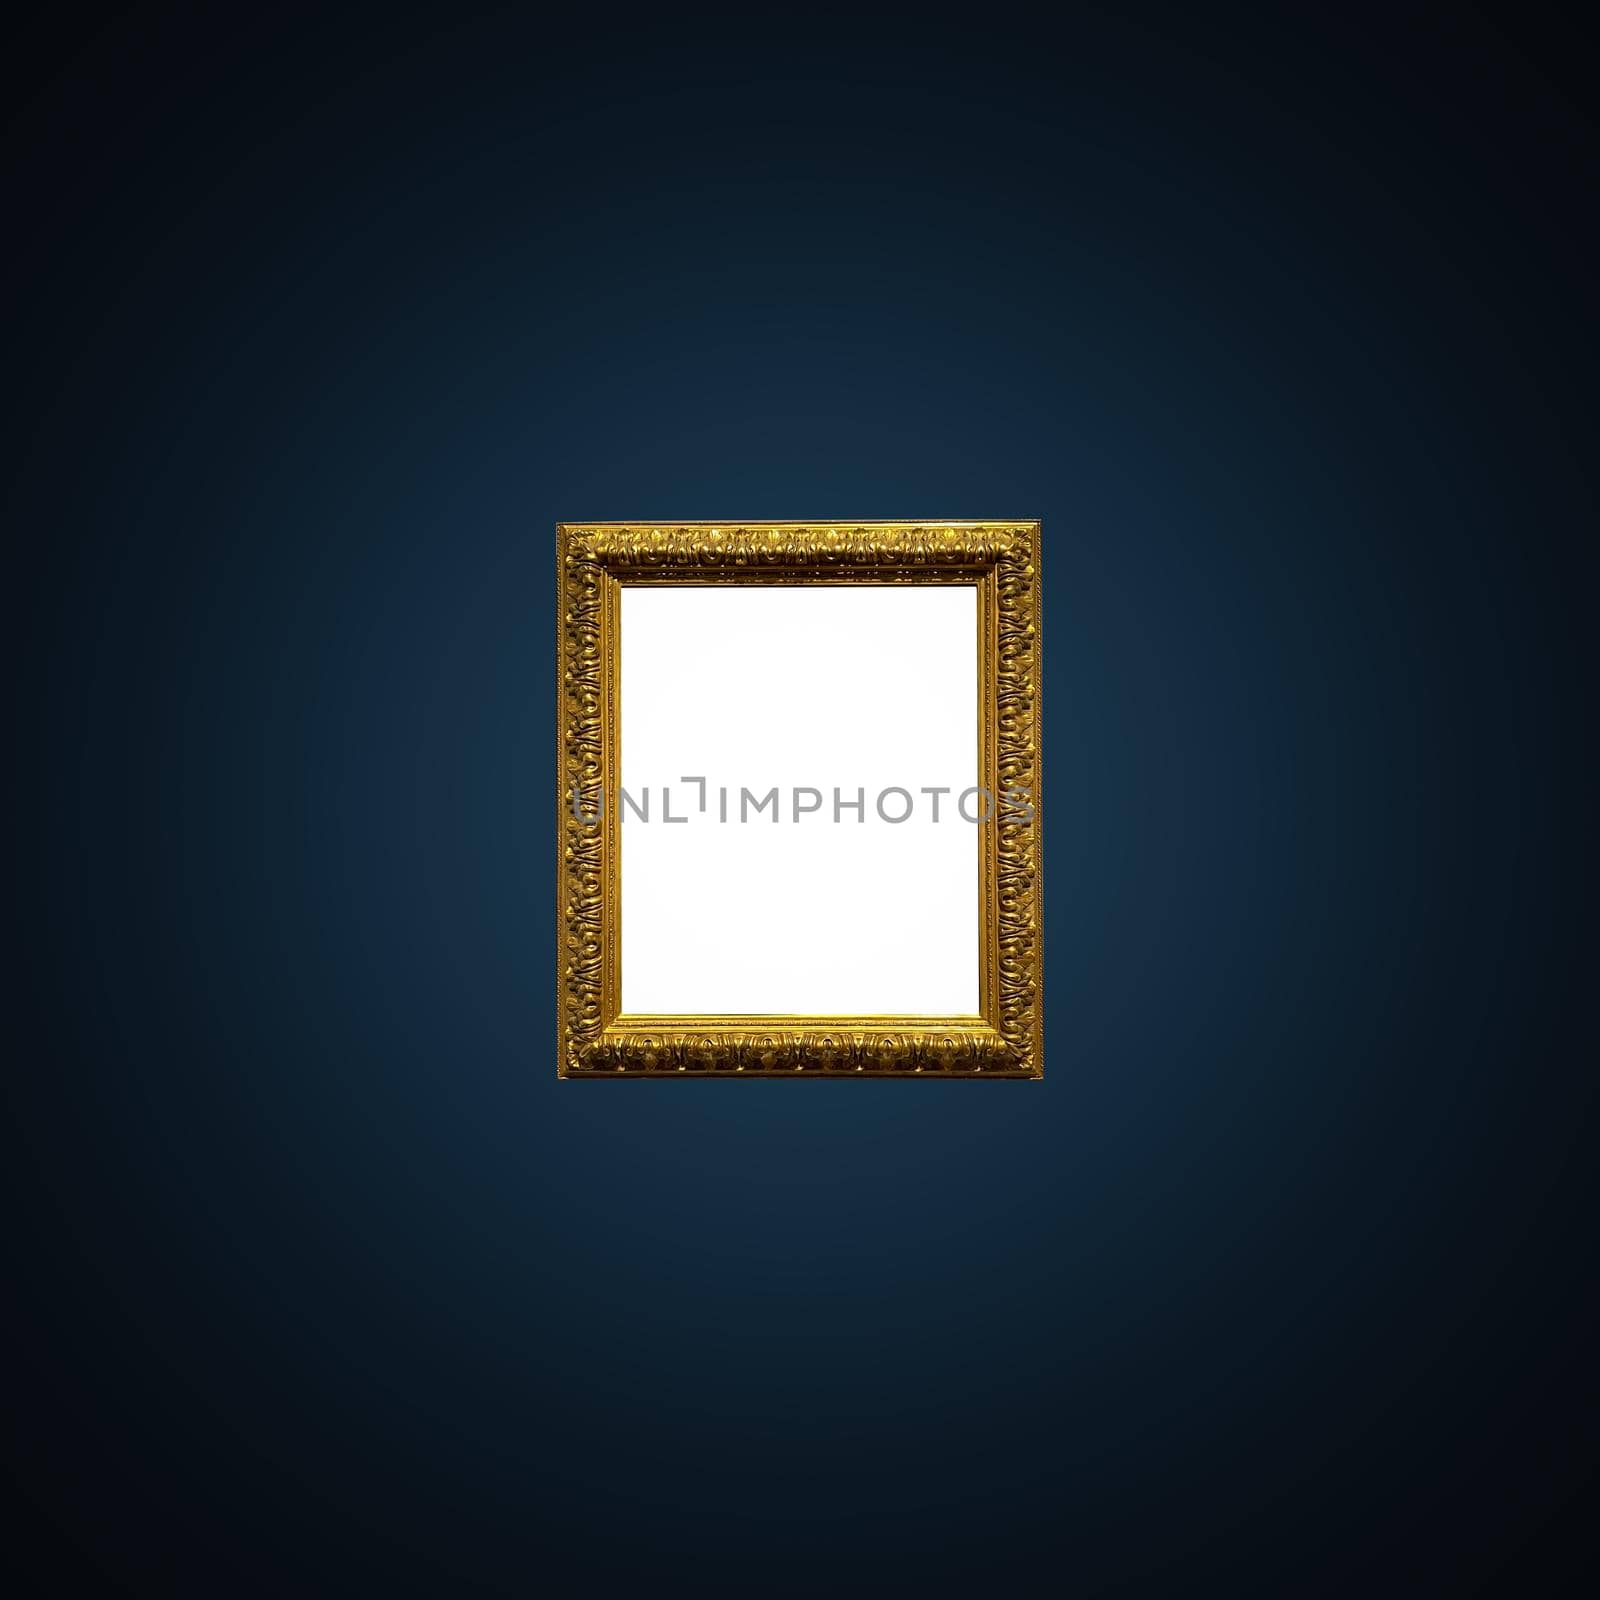 Antique art fair gallery frame on royal blue wall at auction house or museum exhibition, blank template with empty white copyspace for mockup design, artwork by Anneleven